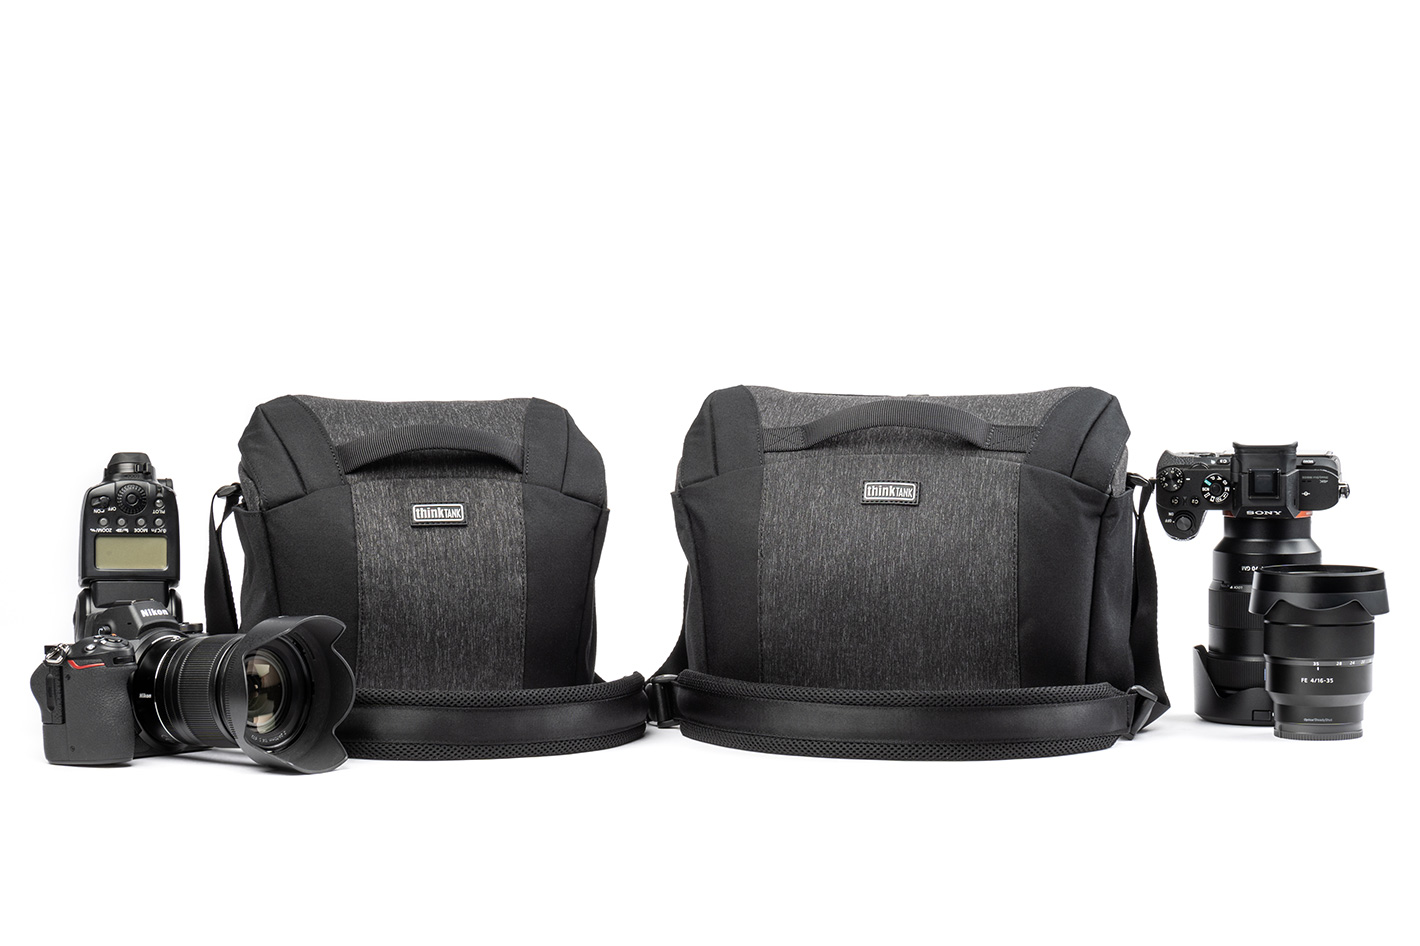 Think Tank Photo announces the new SpeedTop camera bags by Jose Antunes -  ProVideo Coalition